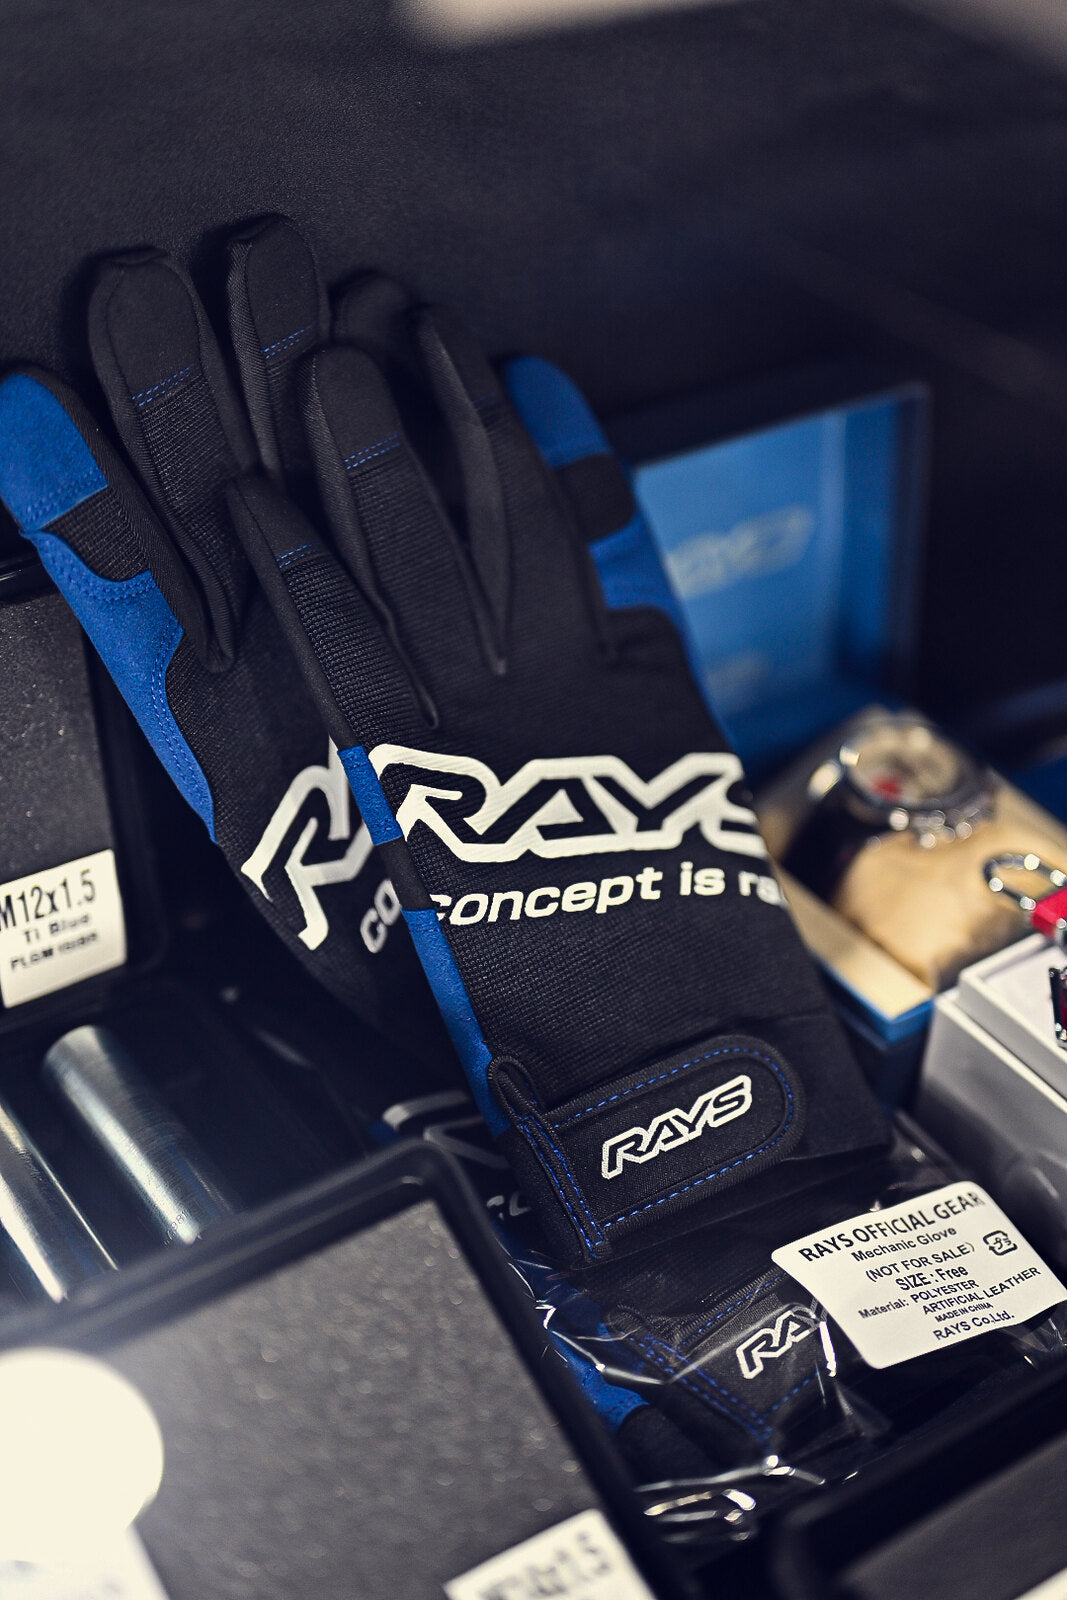 RAYS Official Mechanic Gloves - Premium Merchandise from Merch - From just $45.00! Shop now at MK MOTORSPORTS